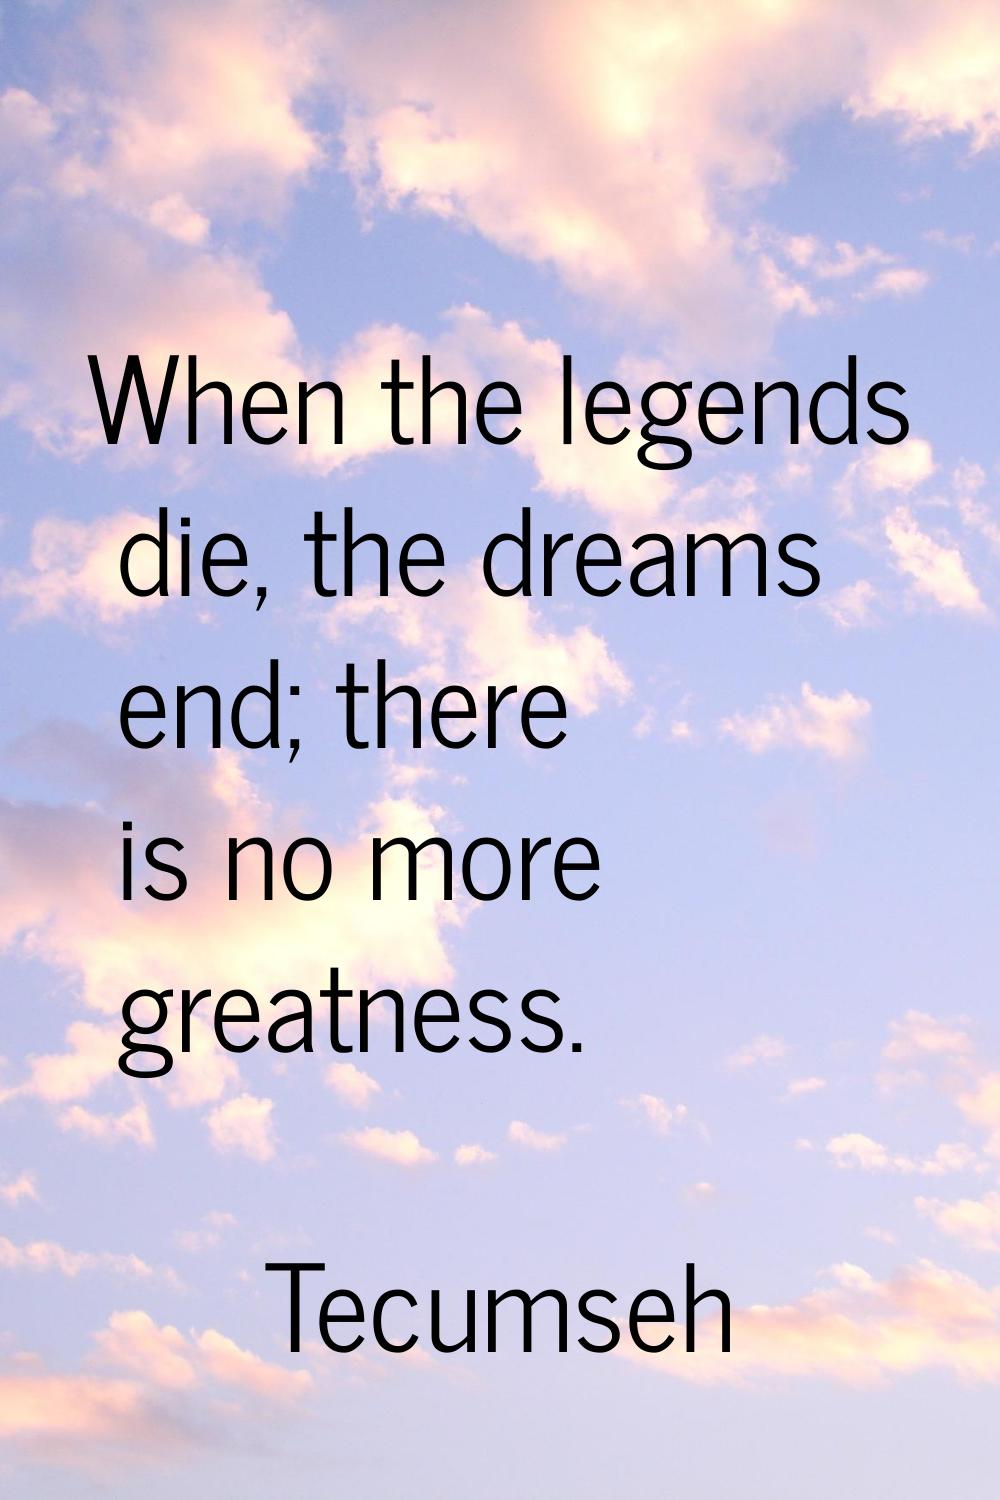 When the legends die, the dreams end; there is no more greatness.